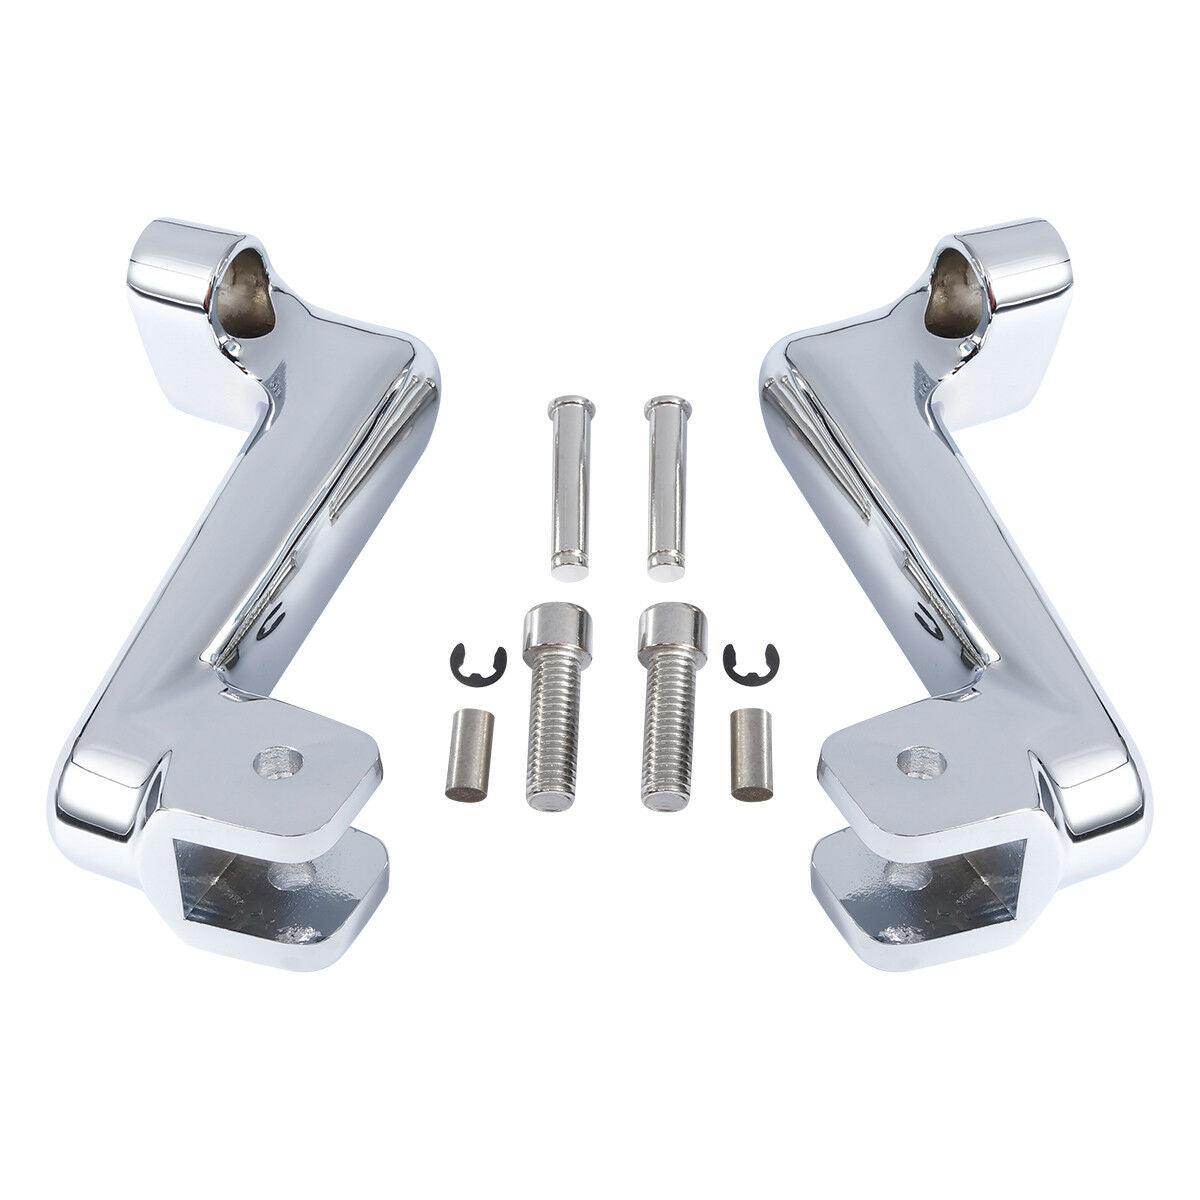 Chrome Passenger FootPeg Mount Bracket For Indian Chieftain Classic 2014-2020 18 - Moto Life Products